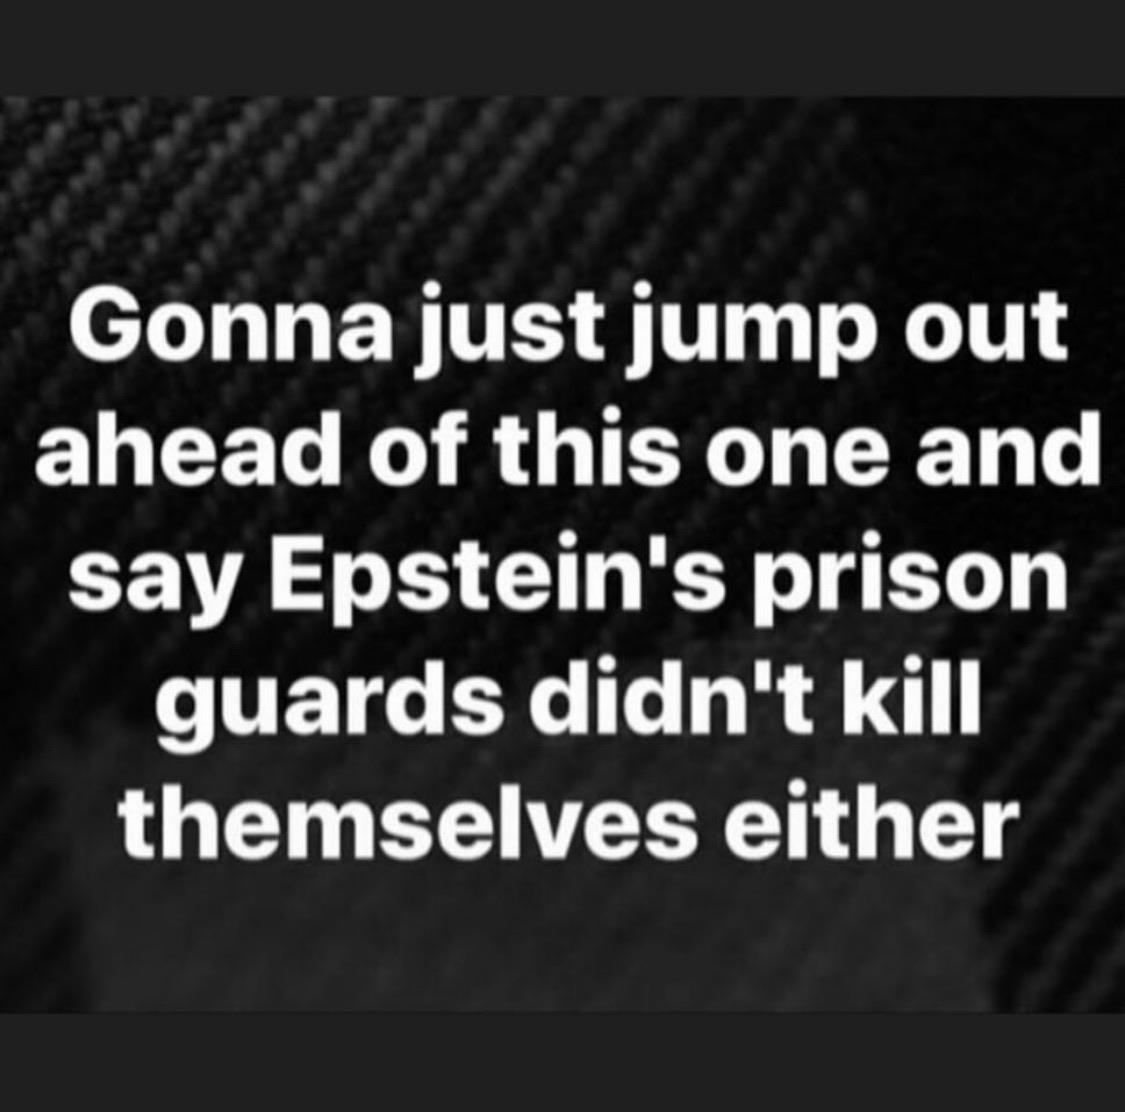 nsfw offensive-memes nsfw text: Gonna just jump out ahead of this one and say Epstein's prison guards didn't kill themselves either 